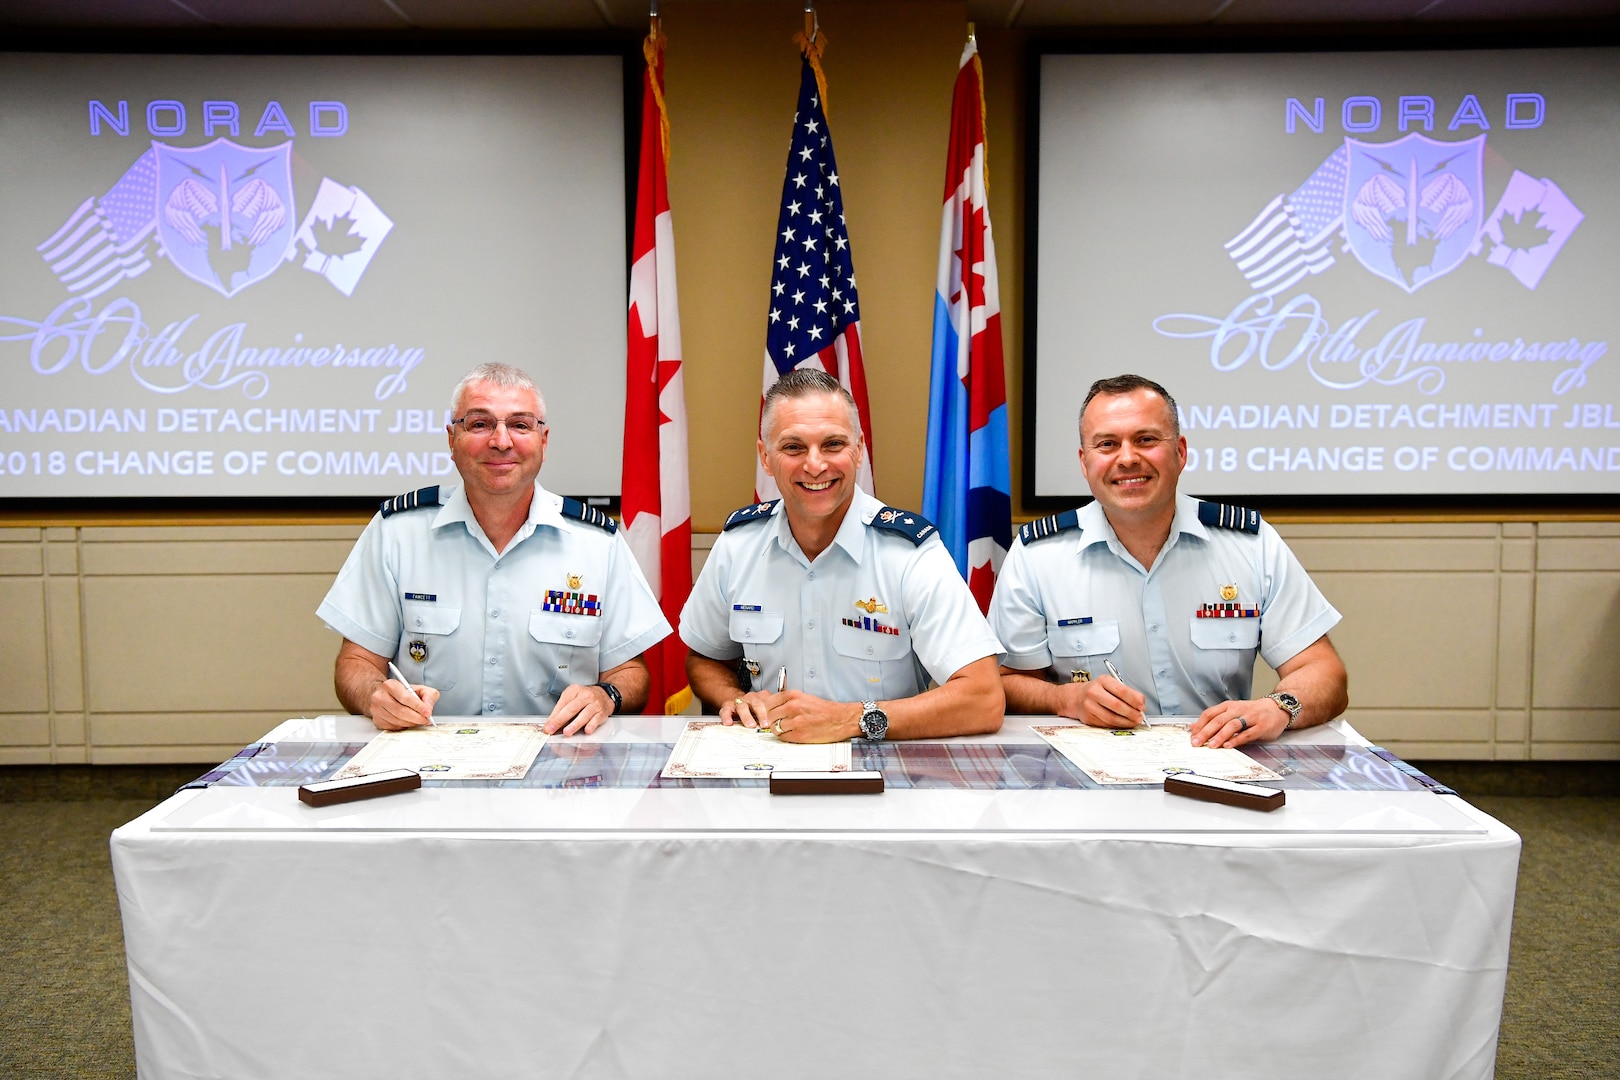 Canadian Brig. Gen. Sylvain Menard (center), Continental U.S. North American Aerospace Defense Region (CONR) deputy commander, presides over the Western Air Defense Sector Canadian Detachment change of command. Lt. Col. Michael Fawcett (left) assumes command from the outgoing commander, Lt. Col. Matthew Wappler (right), during the ceremonial signing of the change of command scrolls July 10, 2018. (U.S. Air National Guard photo by Kimberly D. Burke)